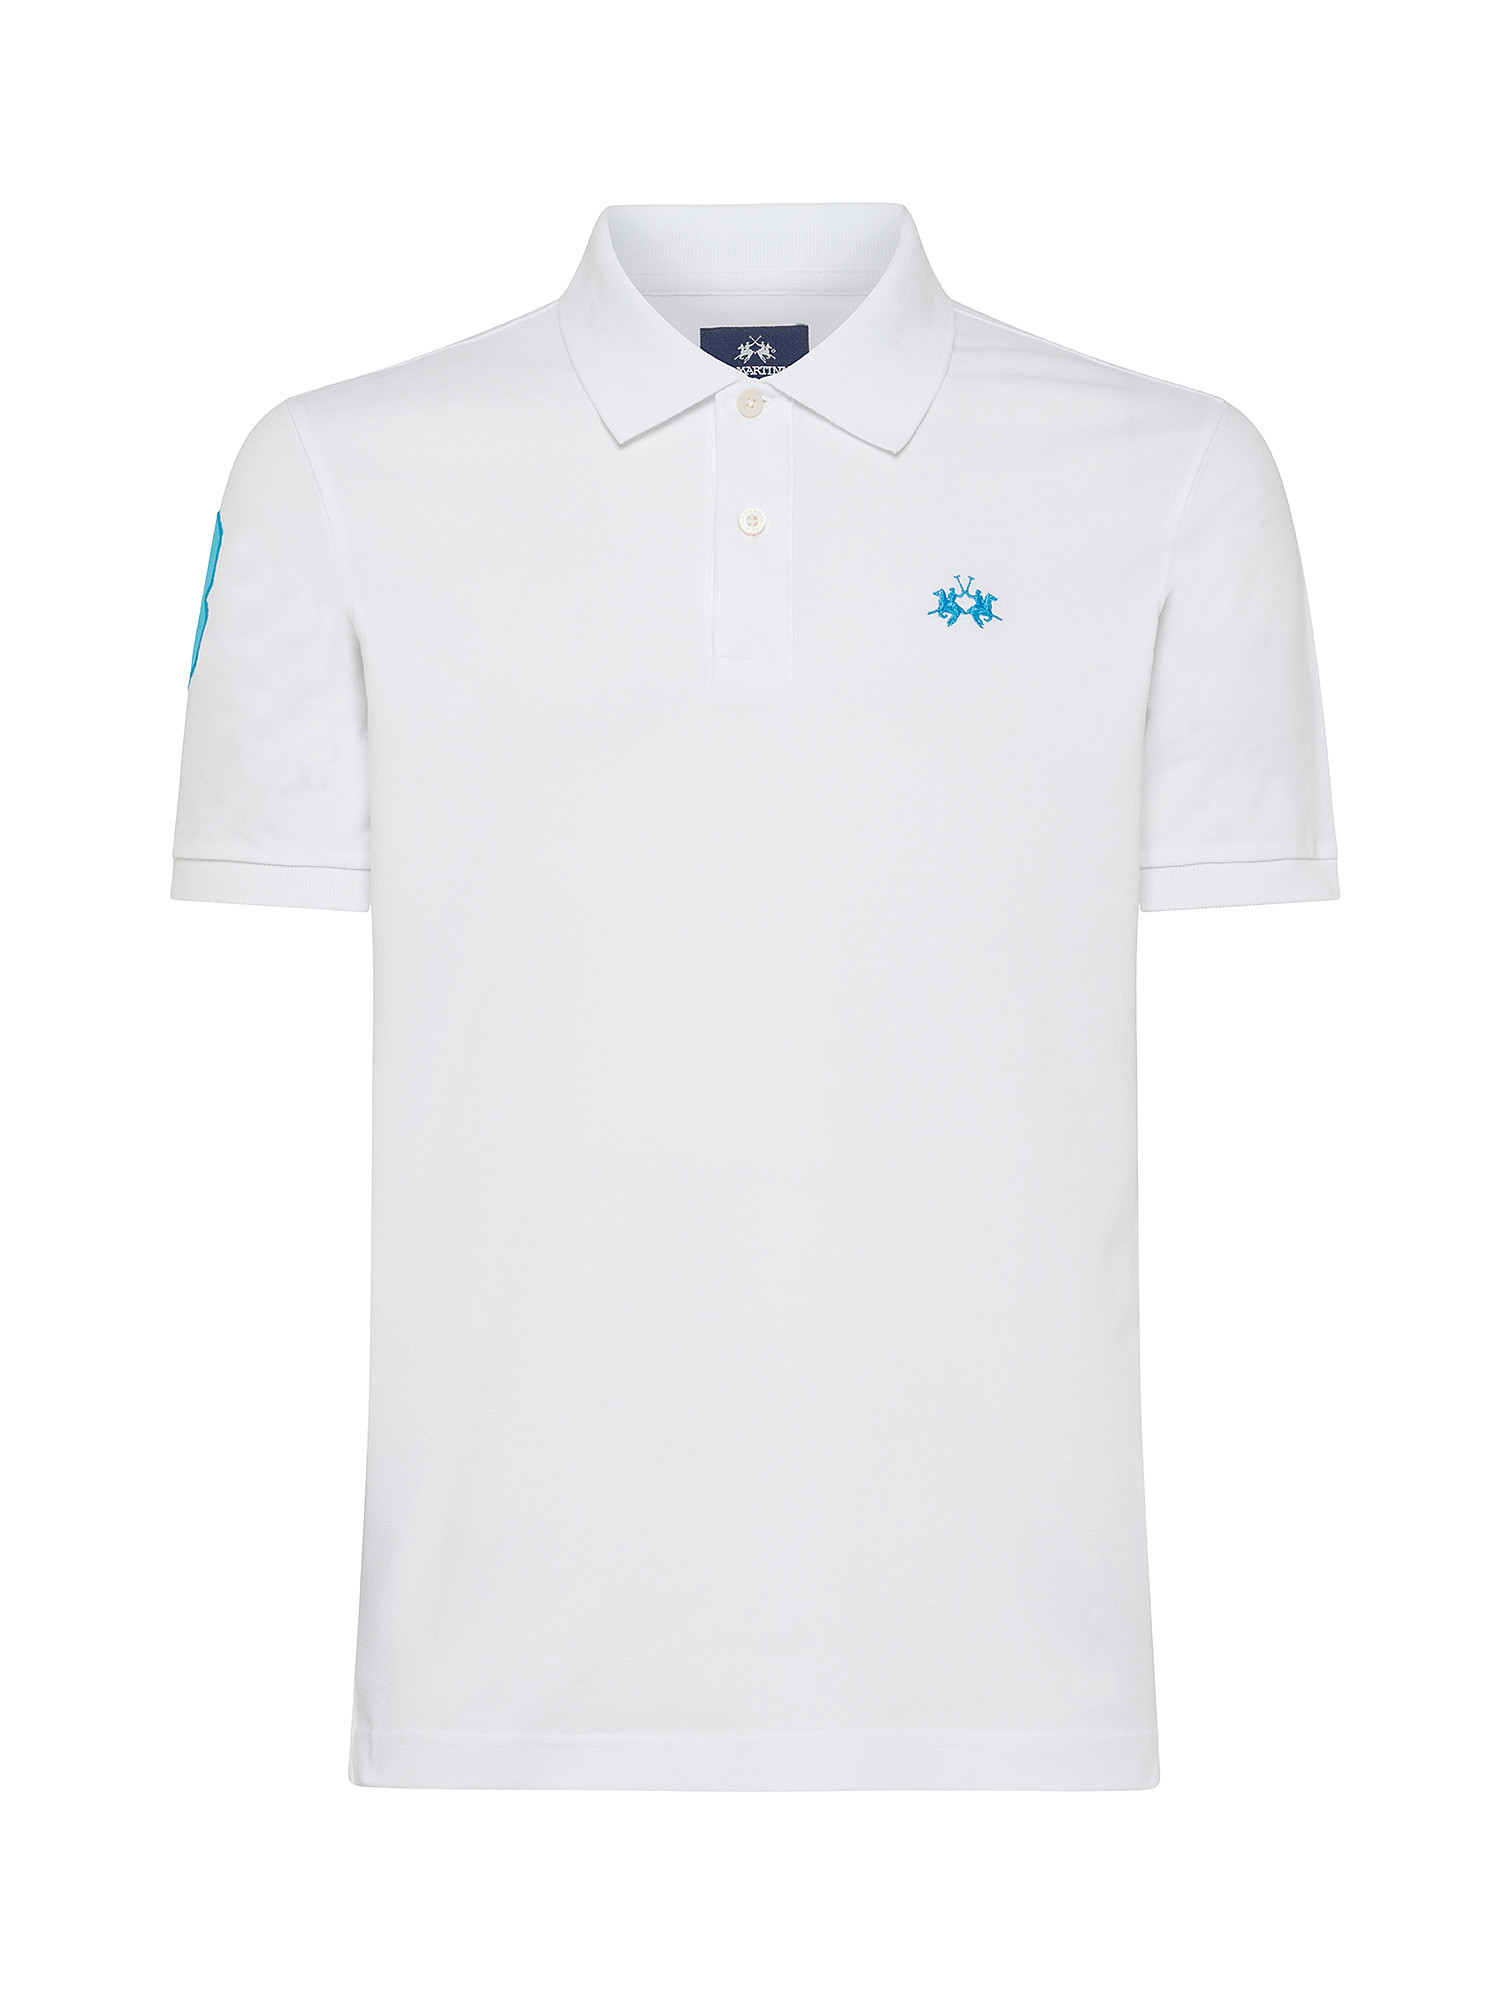 La Martina - Short-sleeved polo shirt in stretch piqué, White, large image number 0